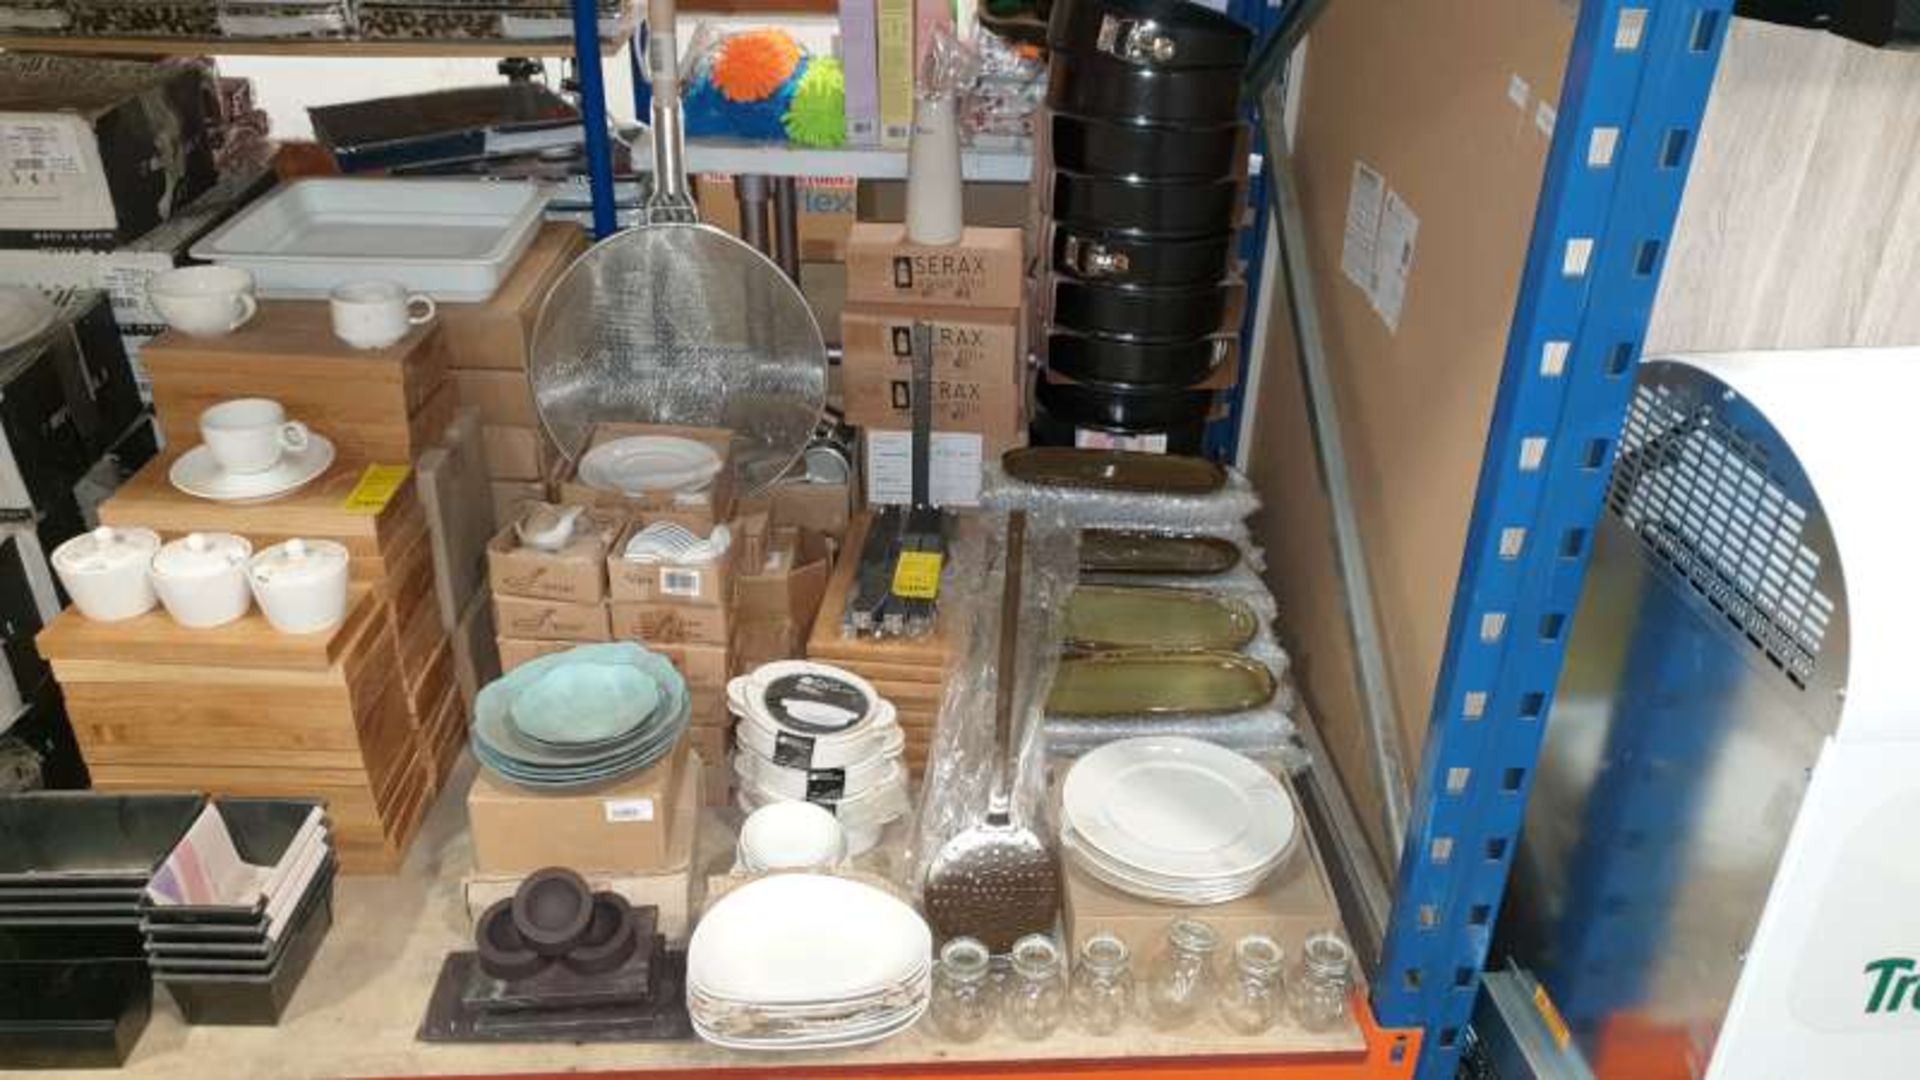 LOT CONTAINING A LARGE QTY OF VARIOS HOTEL / RESTAURANT CROCKERY AND DINING UTENSILS